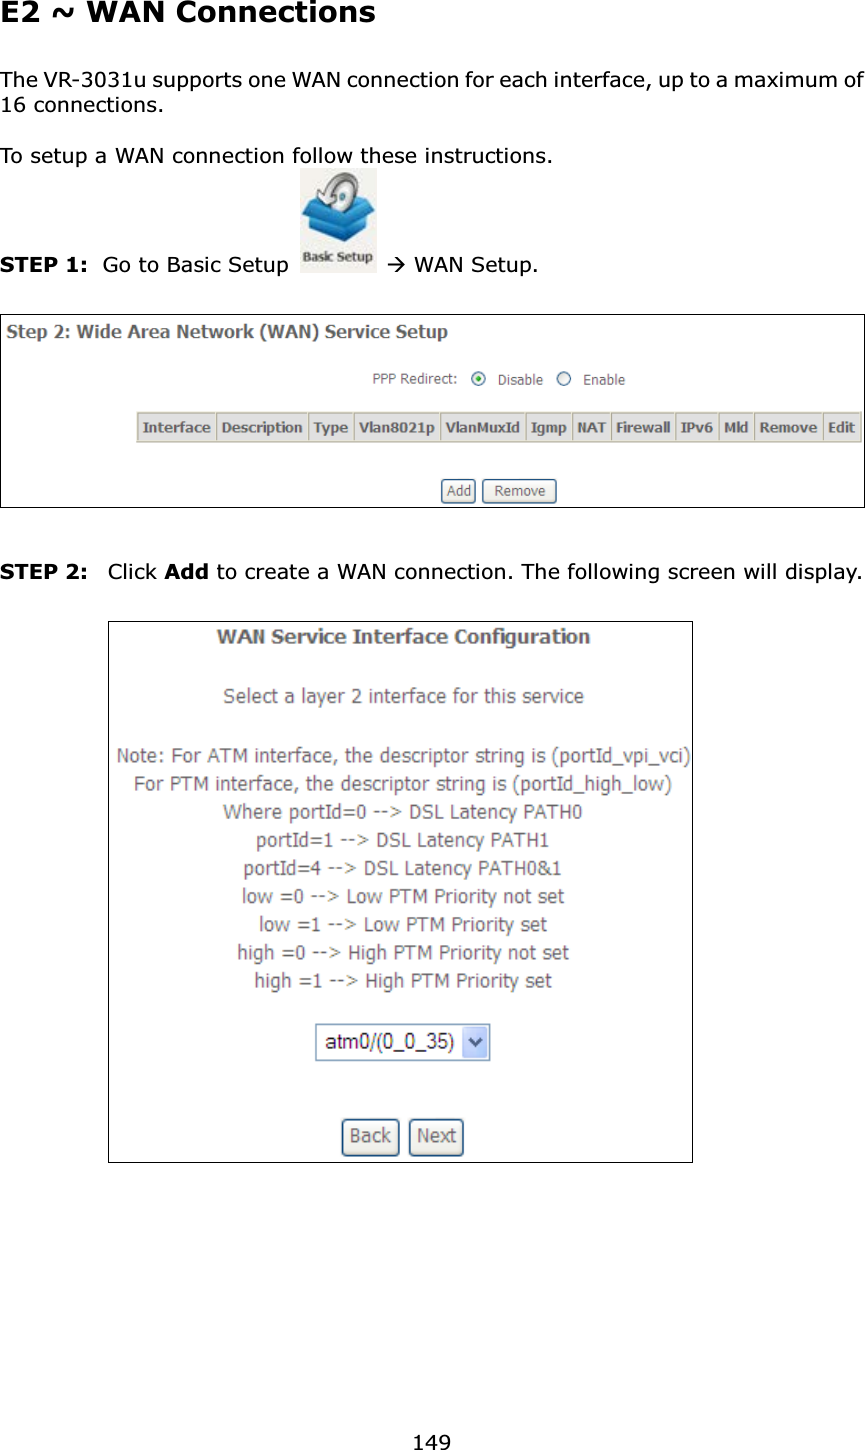 149E2 ~ WAN ConnectionsThe VR-3031u supports one WAN connection for each interface, up to a maximum of 16 connections.To setup a WAN connection follow these instructions.STEP 1: Go to Basic Setup ÆWAN Setup.STEP 2: Click Add to create a WAN connection. The following screen will display.